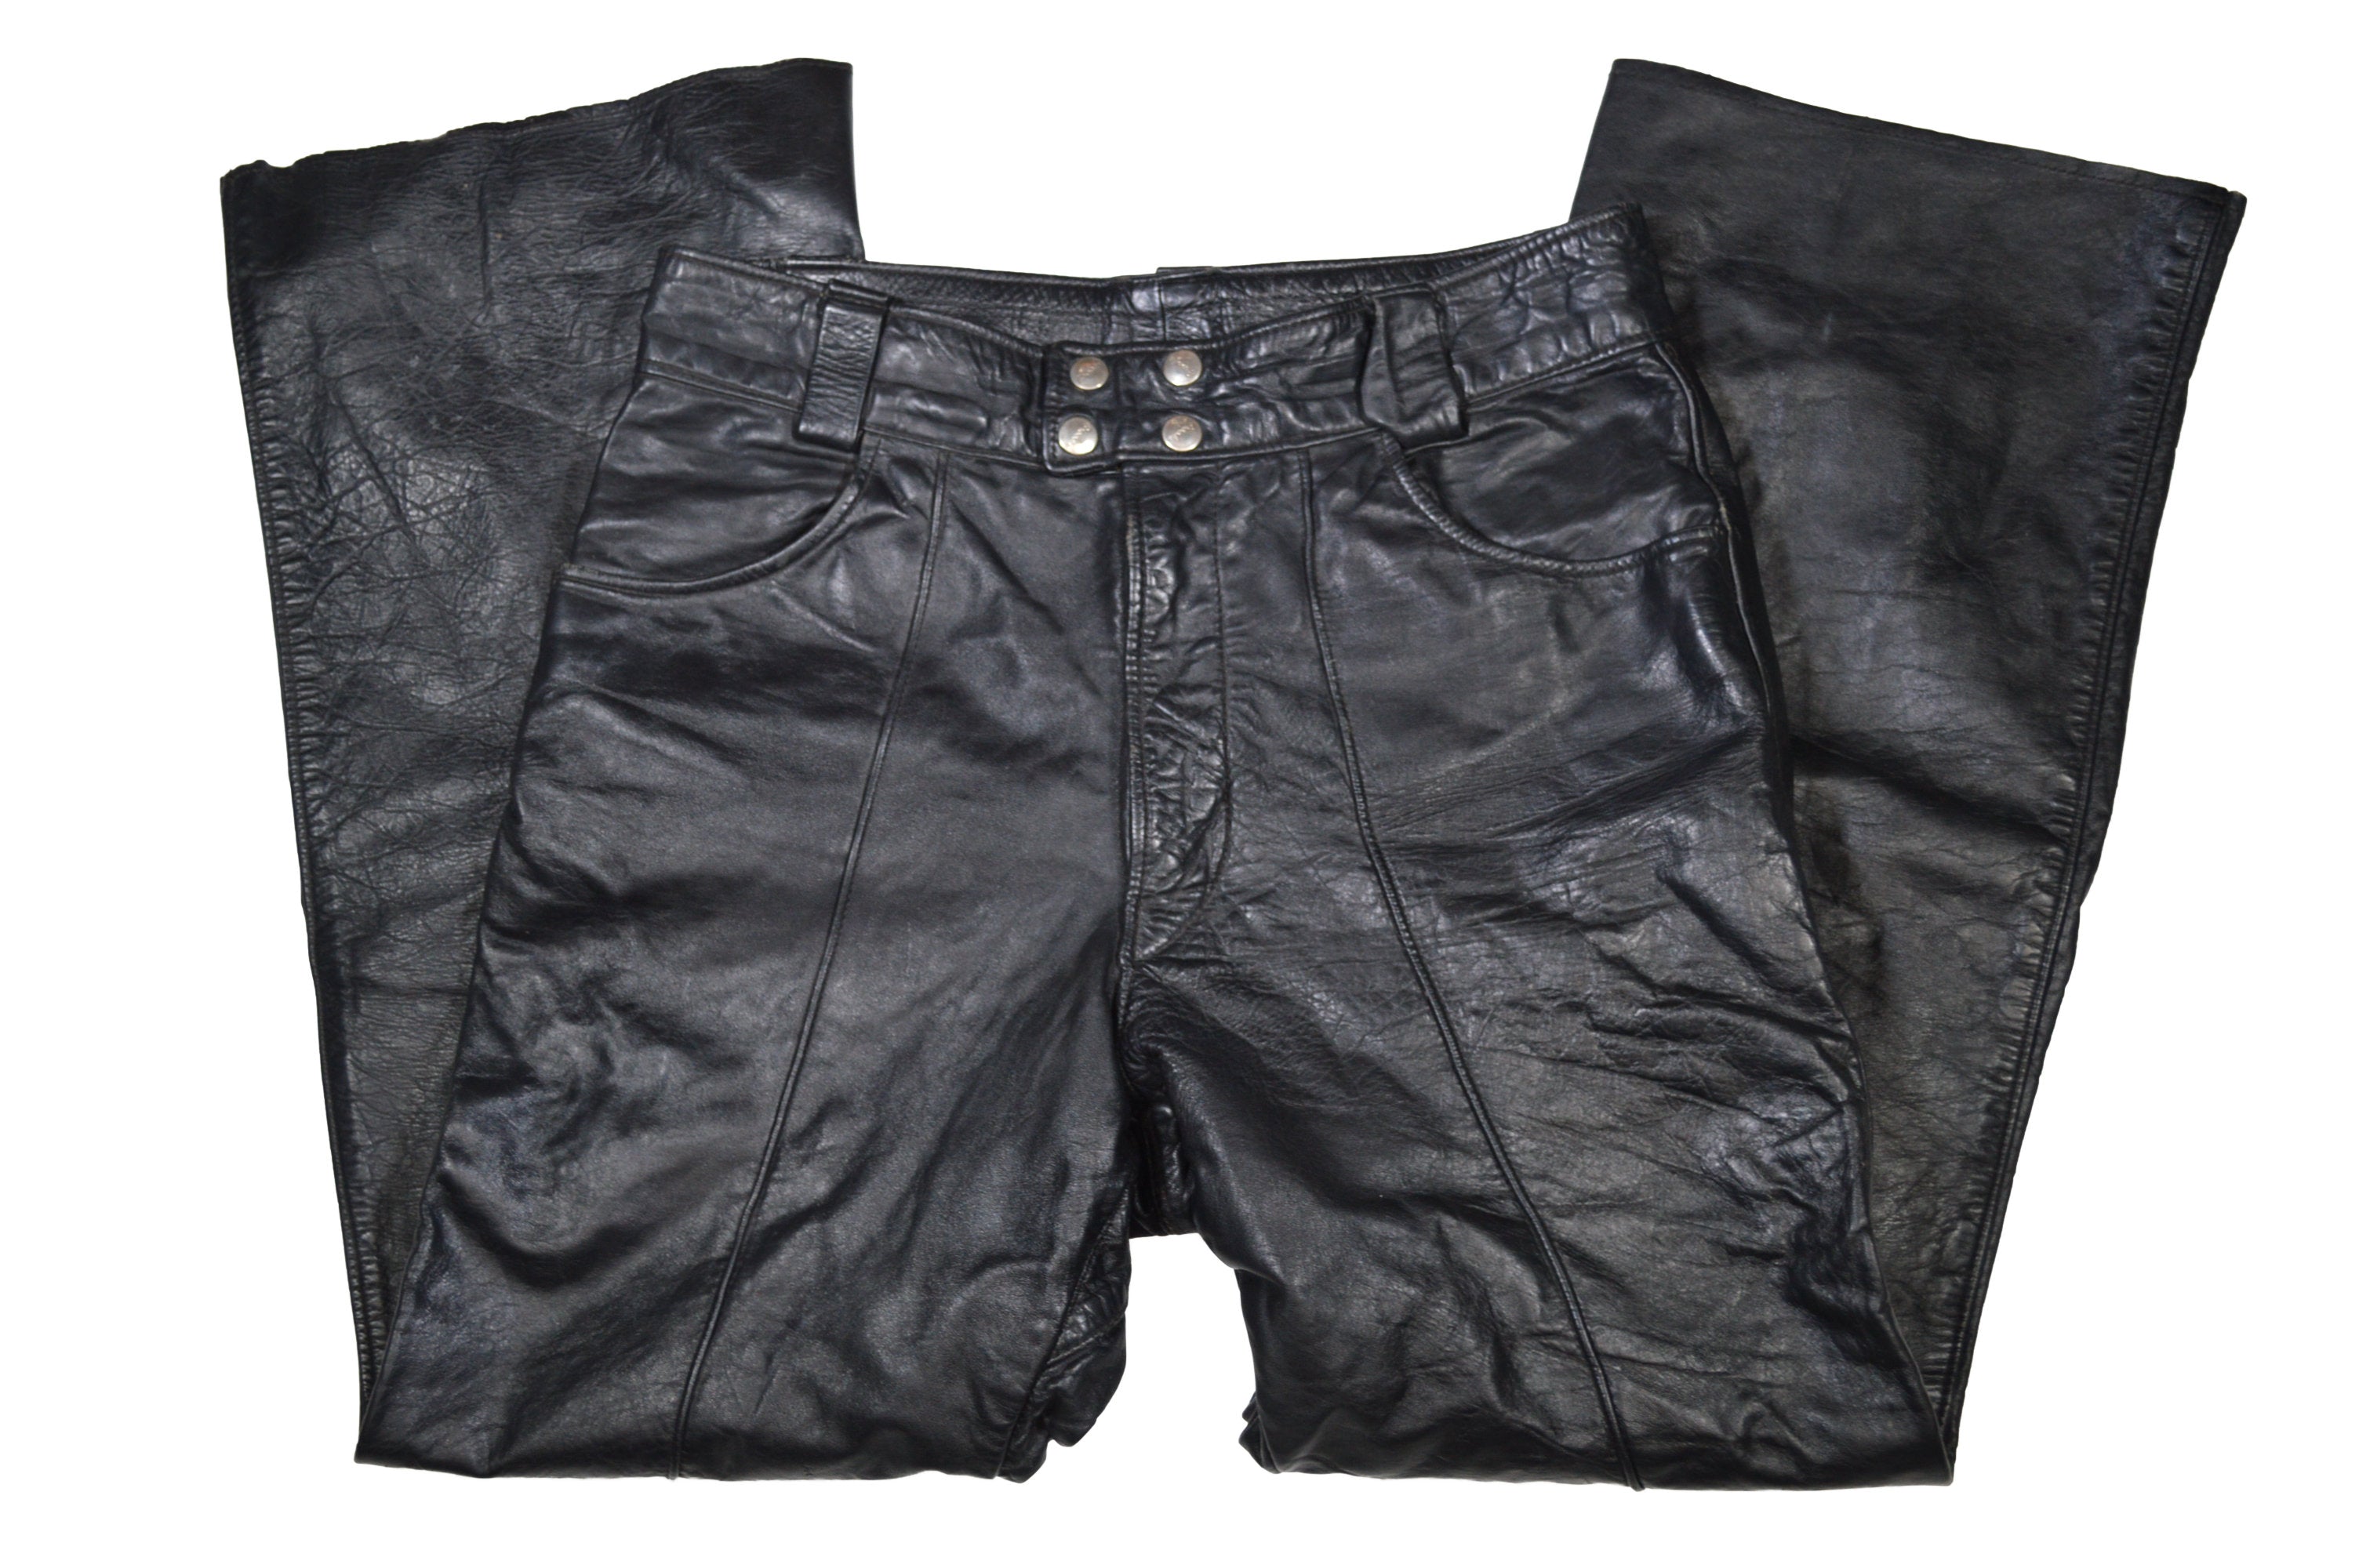 Sold at Auction: Vintage Black Rose Full Leather Touring Motorcycle Pants -  Size 34 - RRP $250 - Excellent Condition